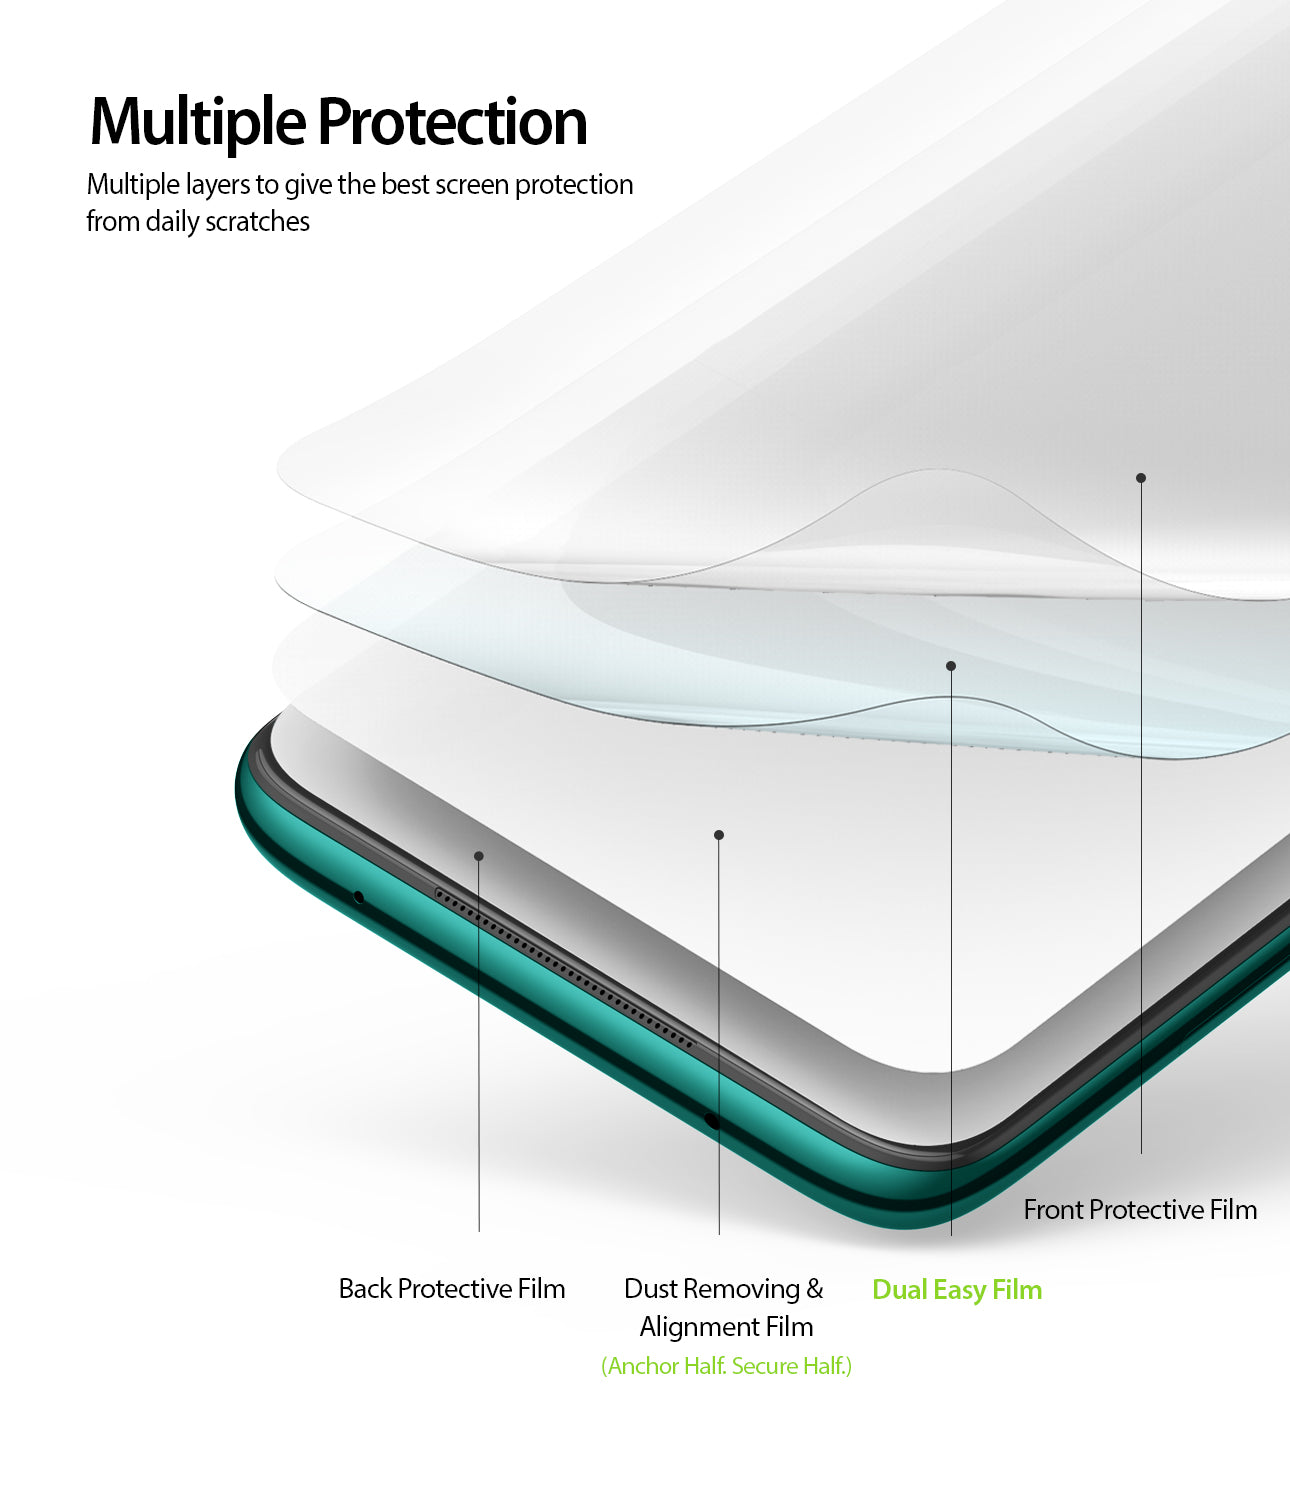 multiple protection - multiple layers to give the best screen protection from daily scratches